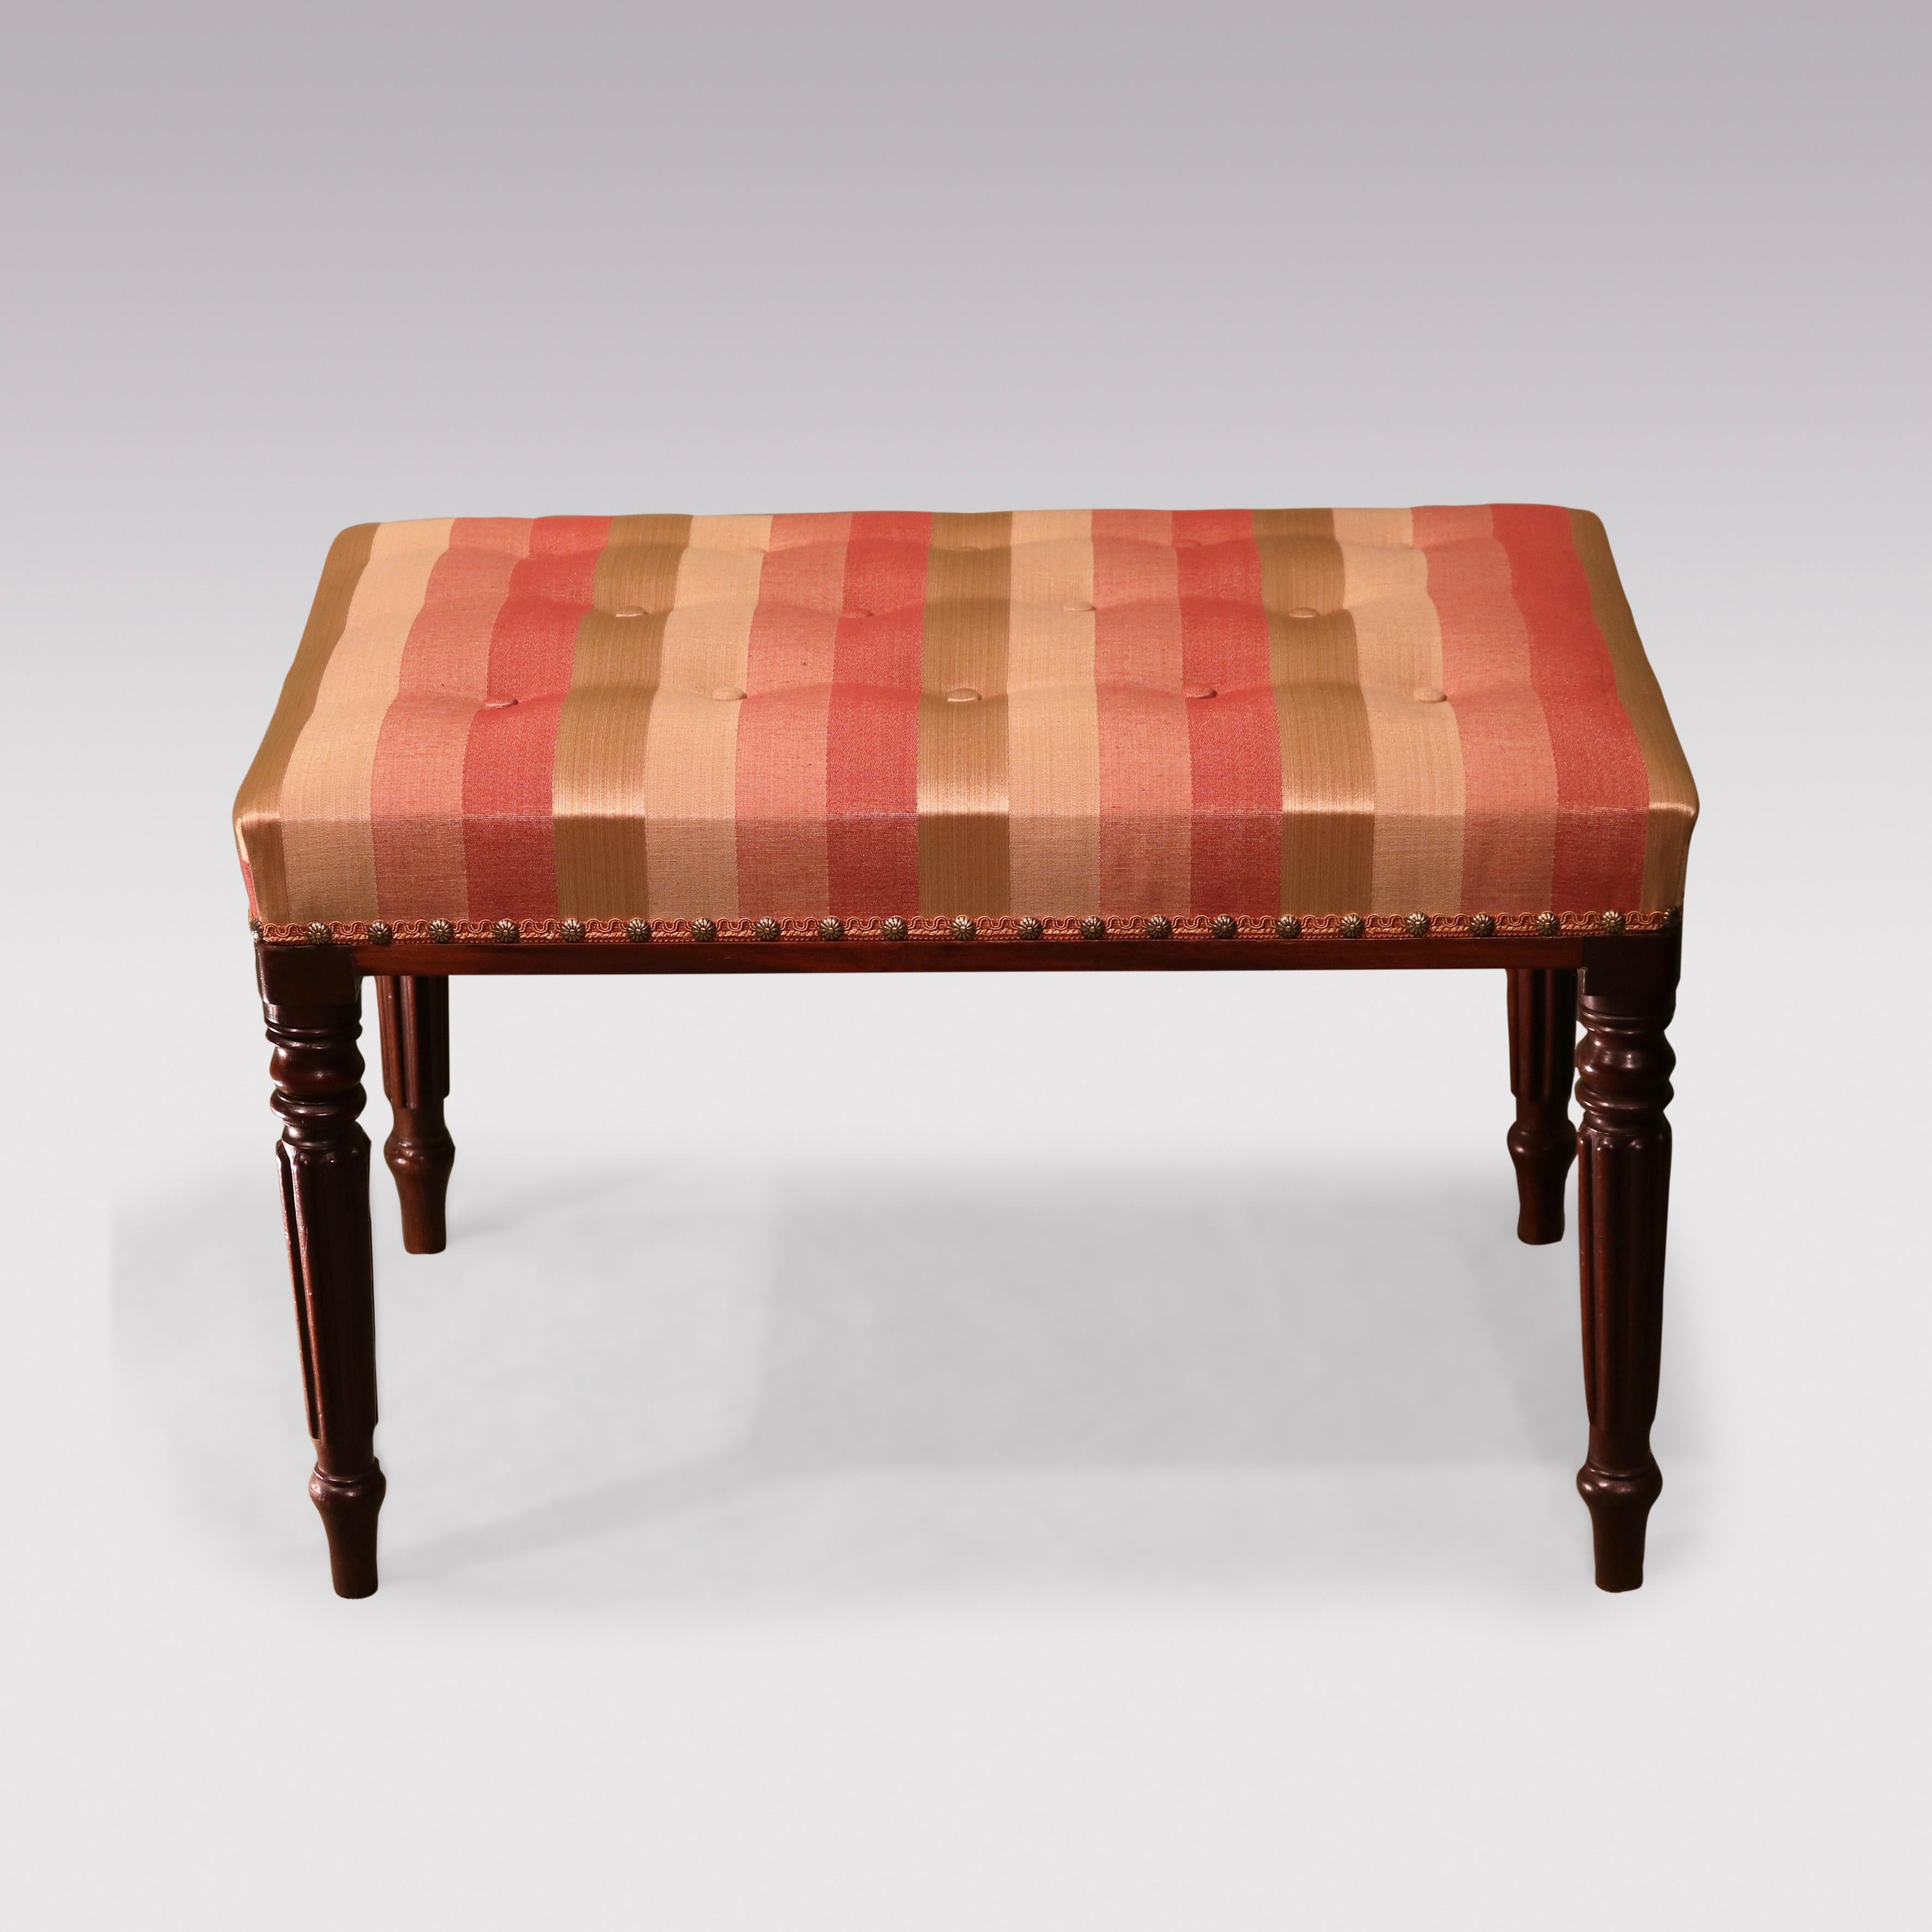 Early 19th Century Regency period mahogany Stool, having upholstered & buttoned rectangular top supported on turned reeded tapering legs.